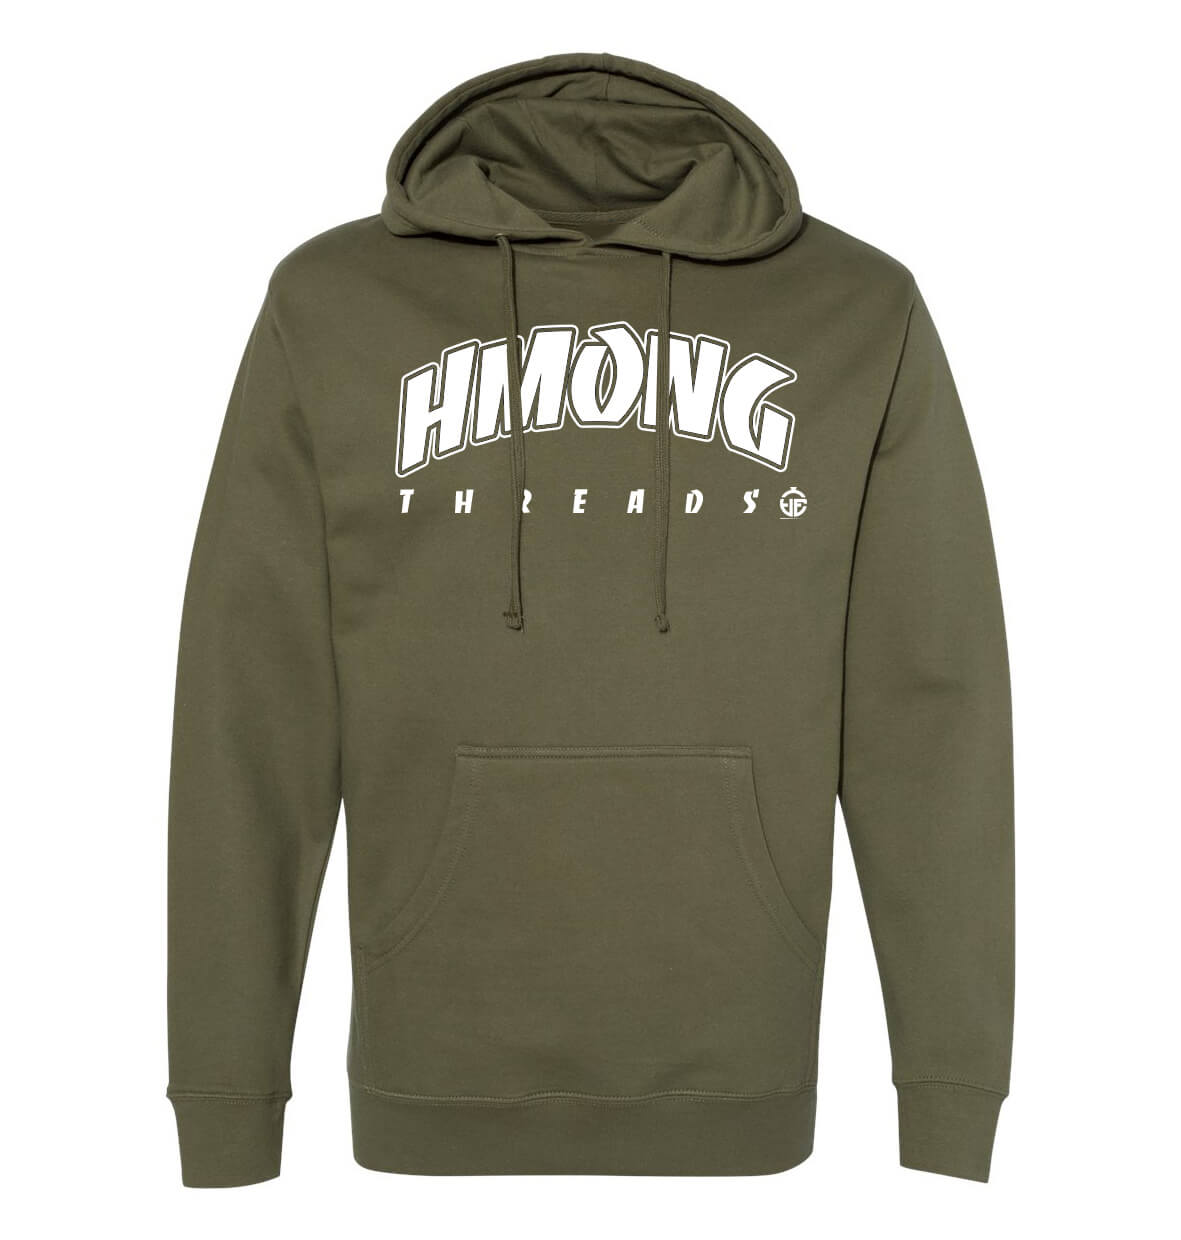 HMONG THREADS ARMY GREEN HOODIE